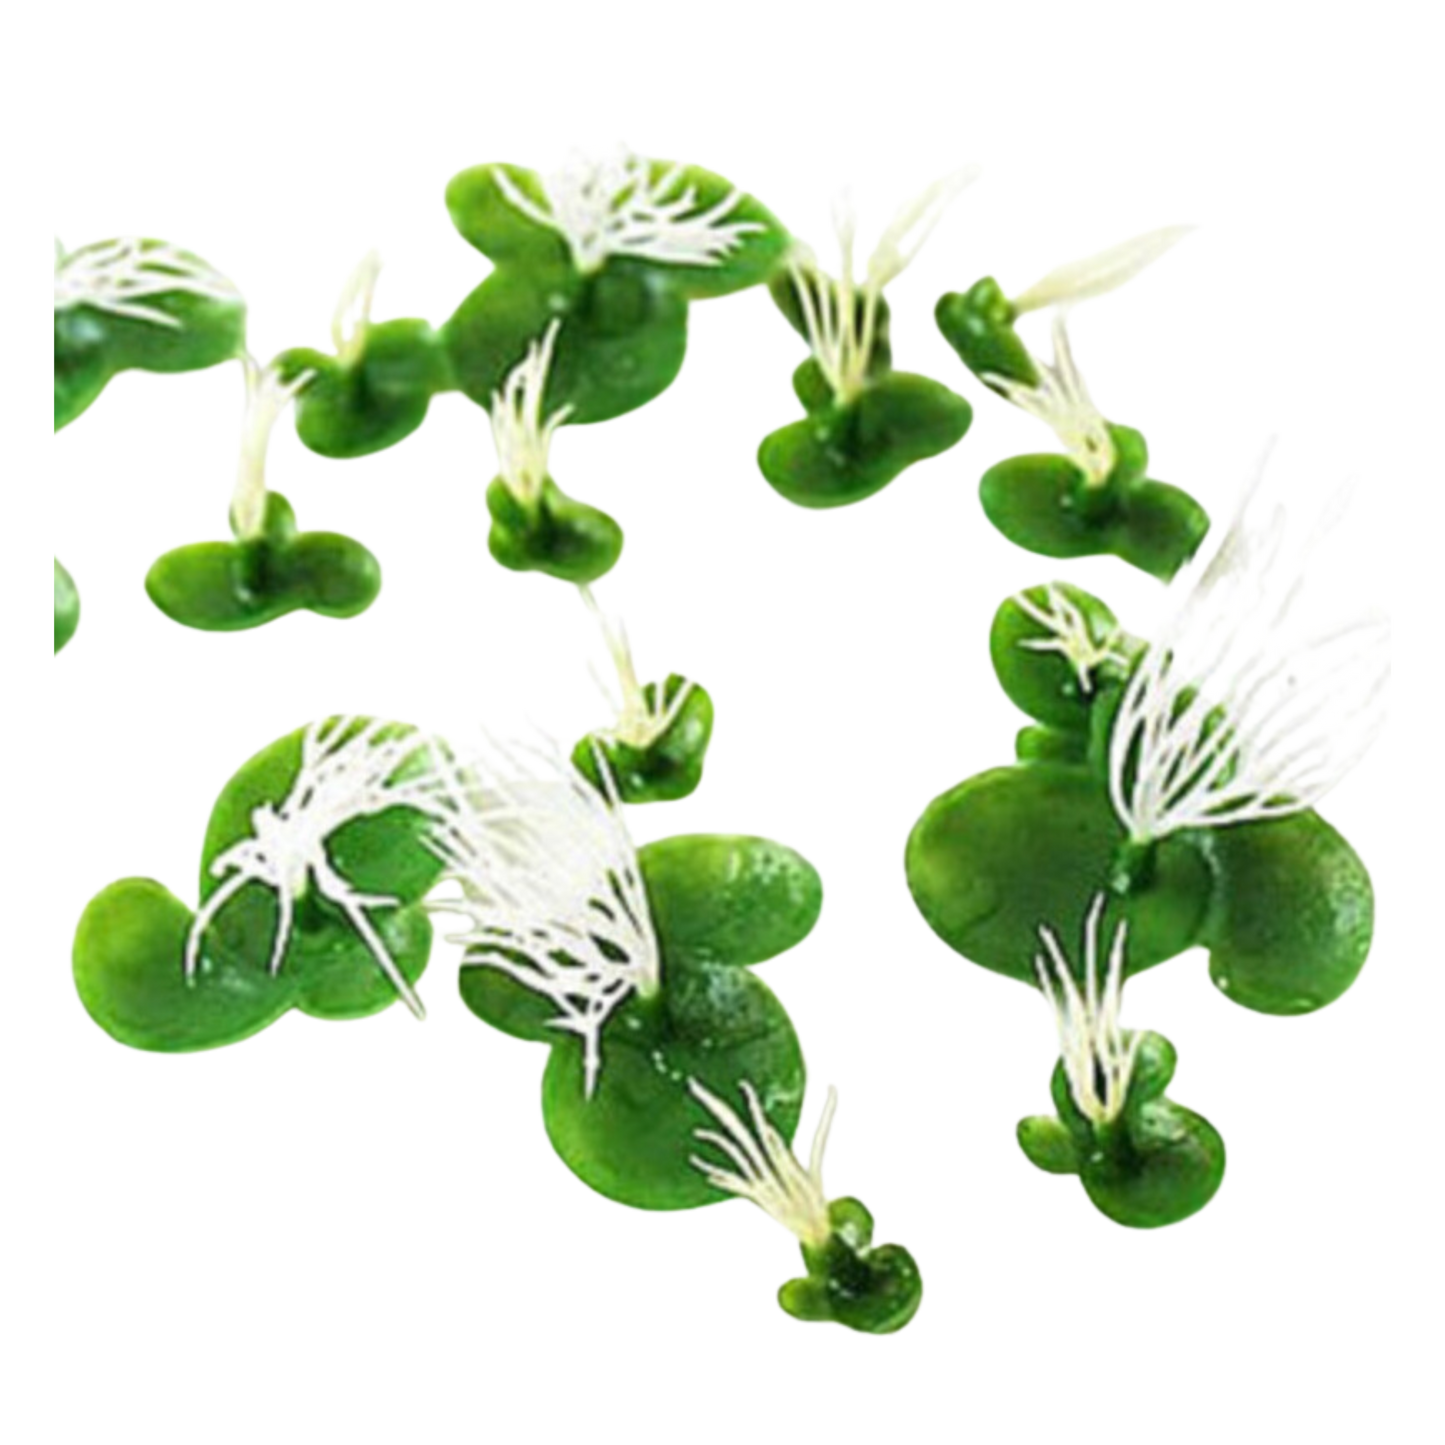 Artificial Floating Duckweed (18 Pack)